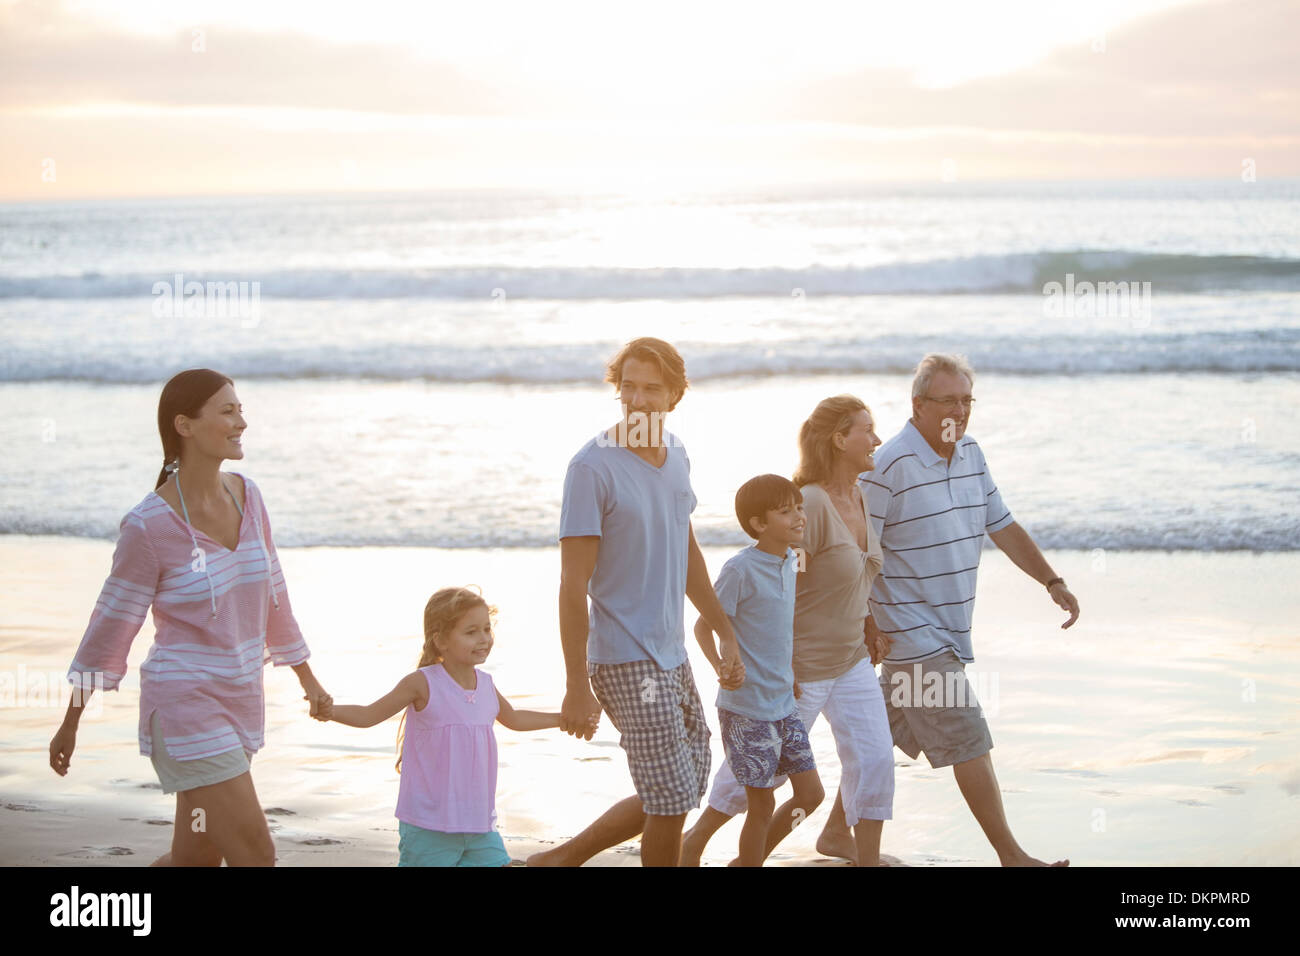 Multi-generation family walking together on beach Stock Photo